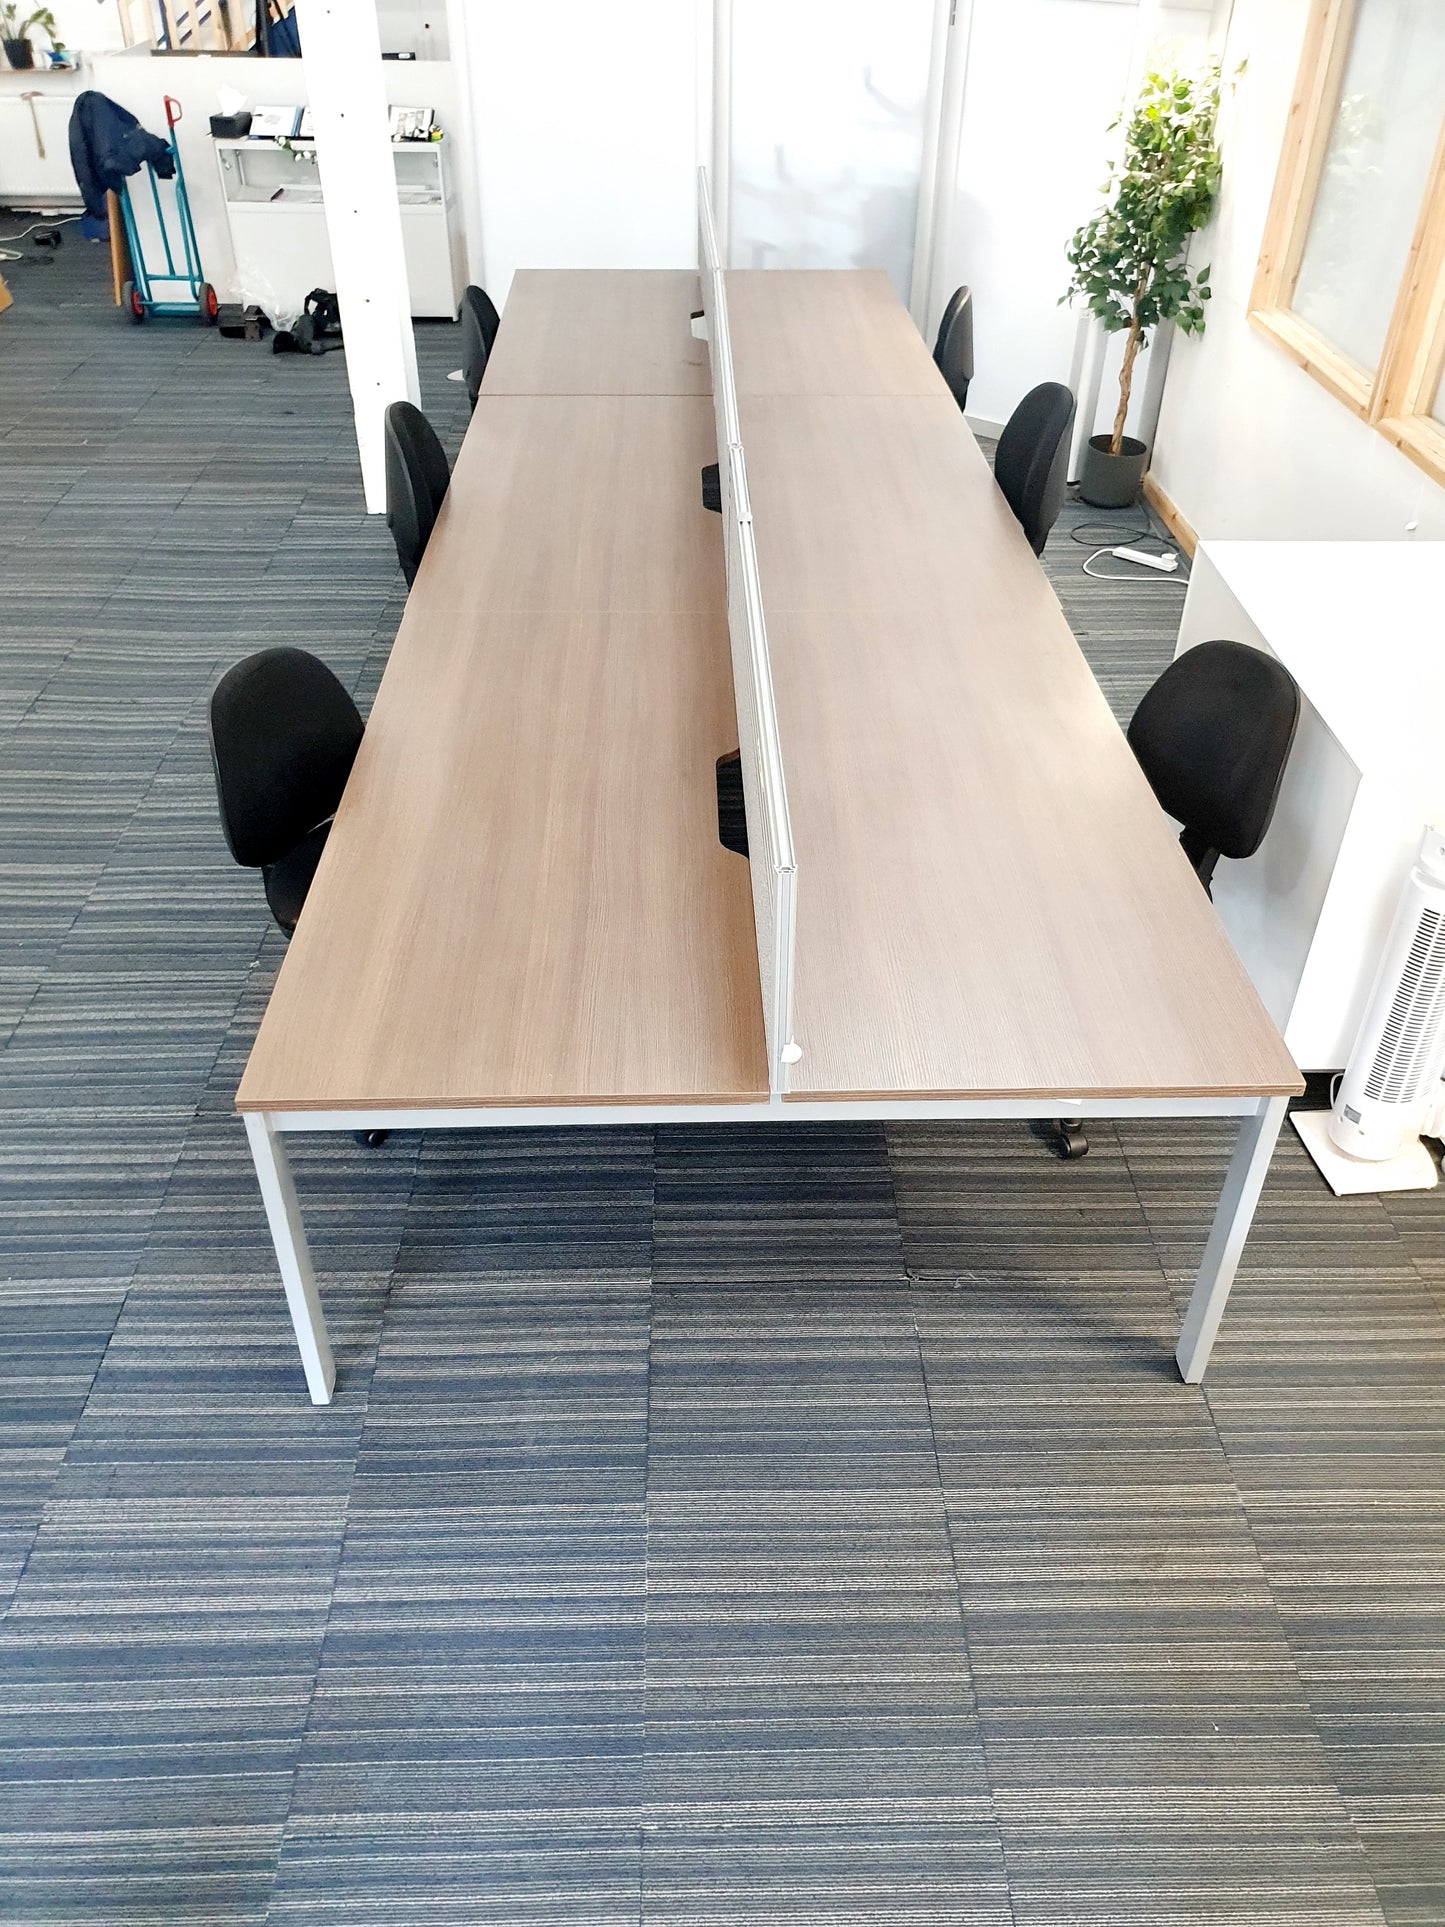 six black chairs tucked under walnut office tables